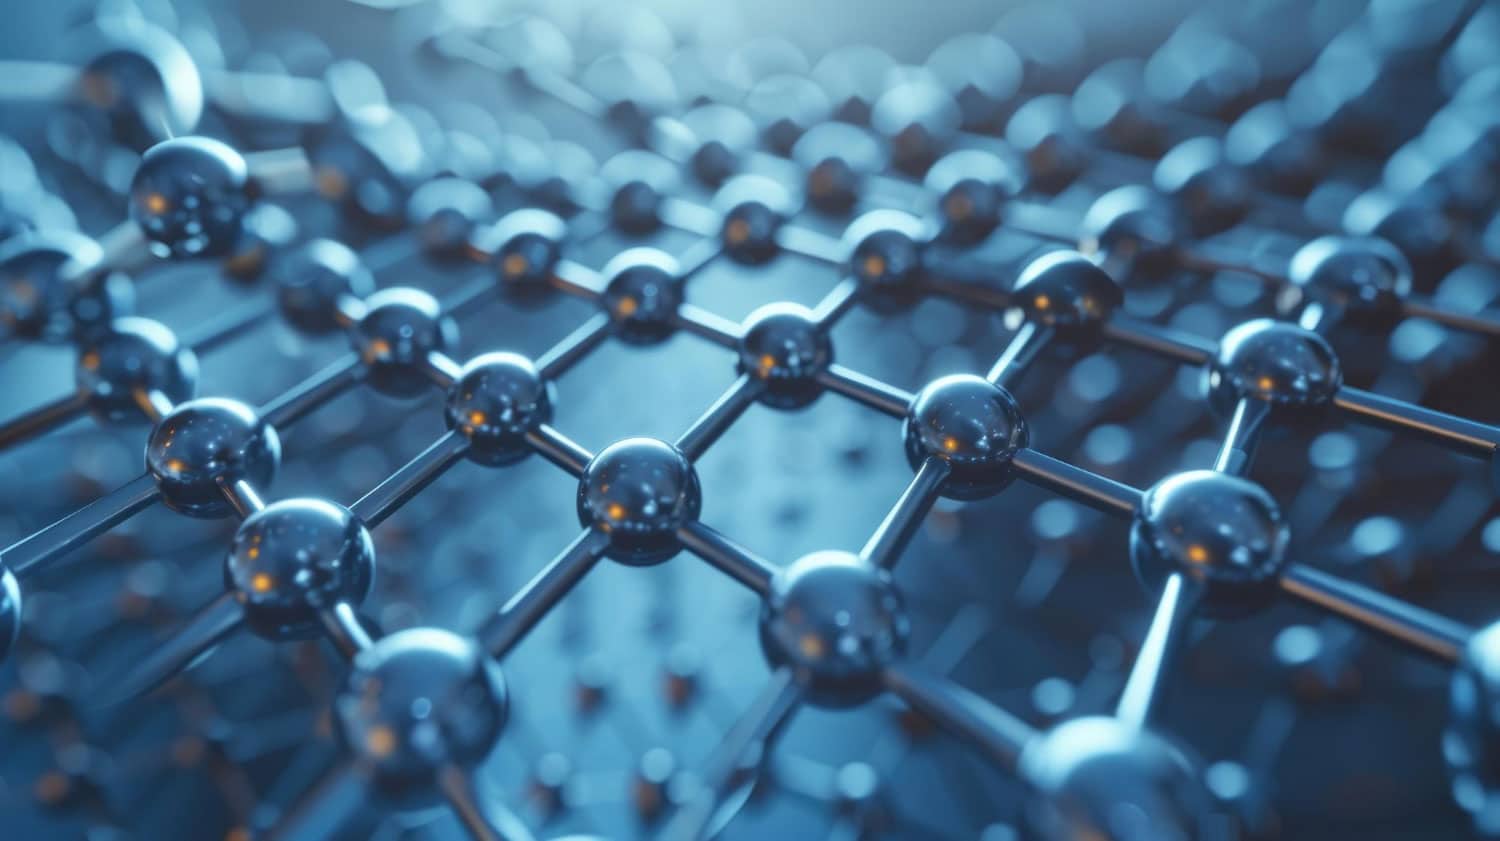 A 3D illustration of molecules made of graphene